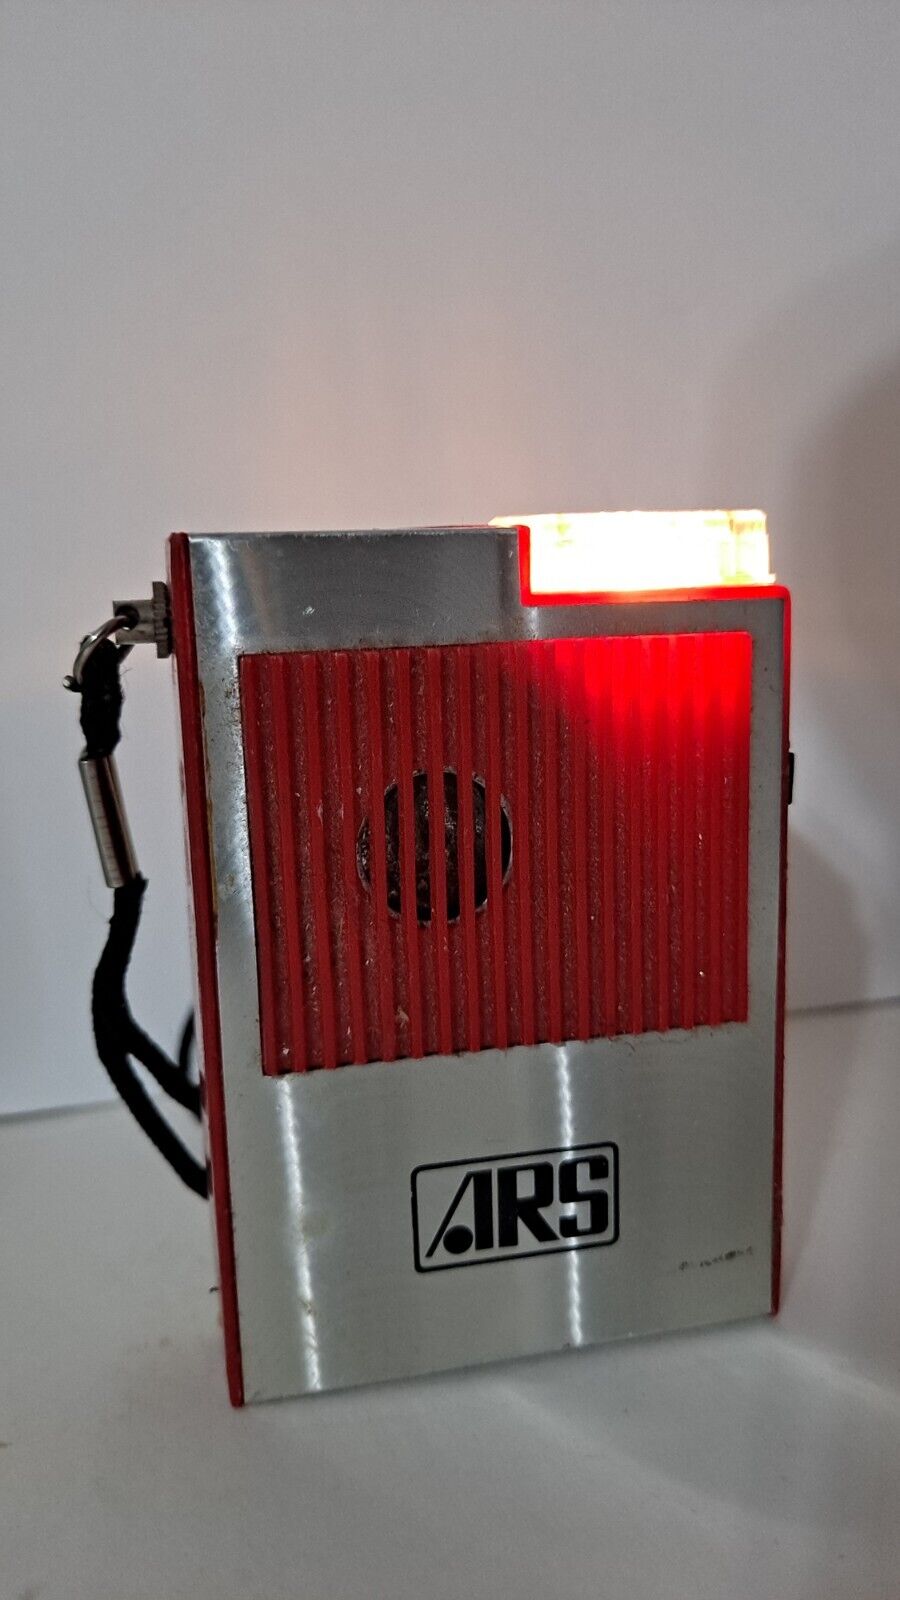 Vintage ARS Personal Alarm & Flashlight - Works Great REALLY LOUD Very Cool